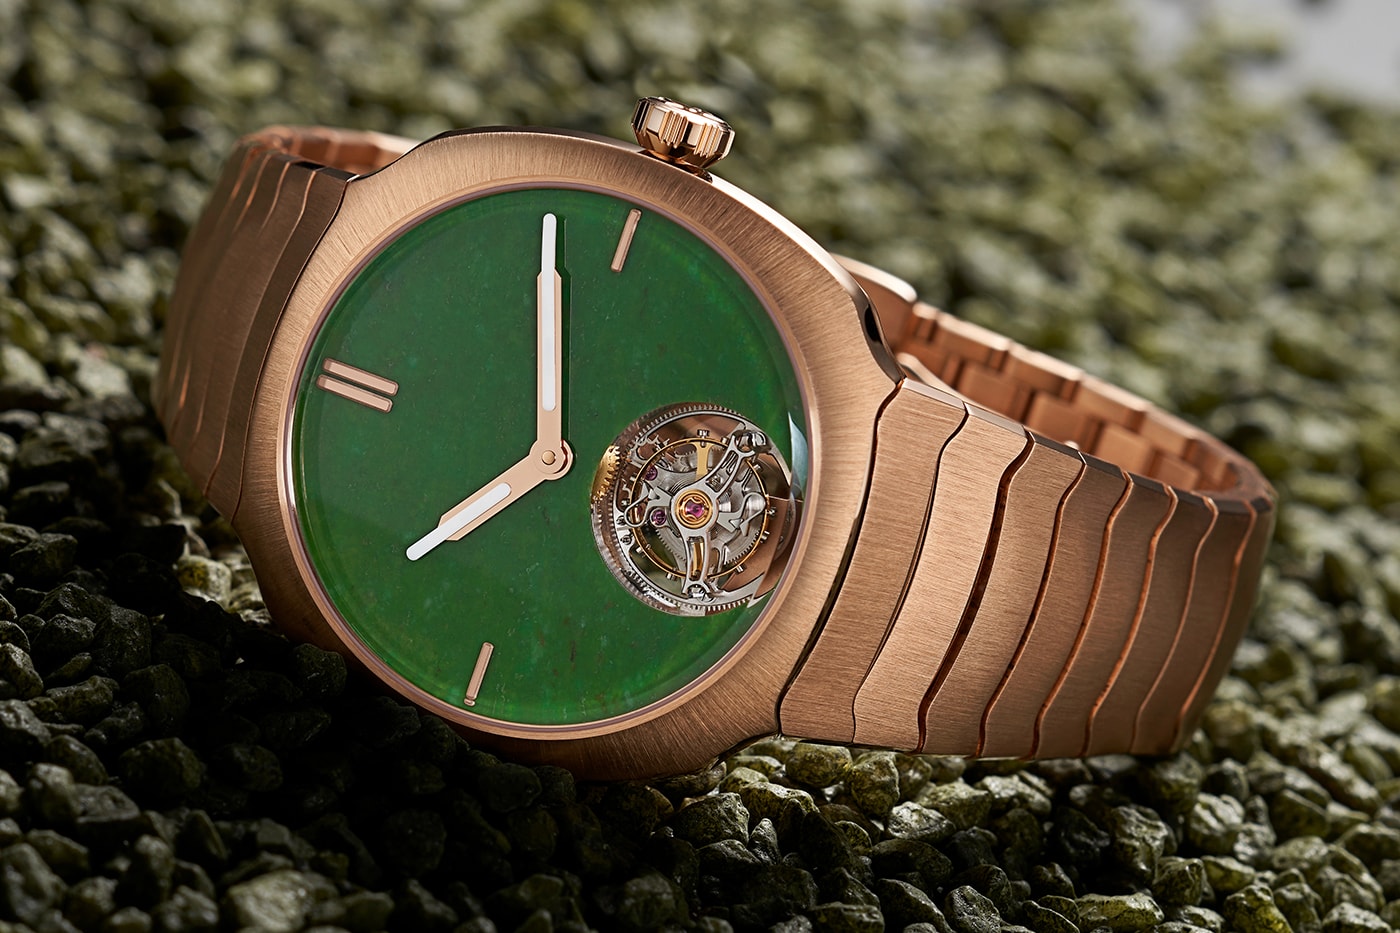 H. Moser Streamliner Tourbillon Concept Wyoming Jade Limited Edition Release Info